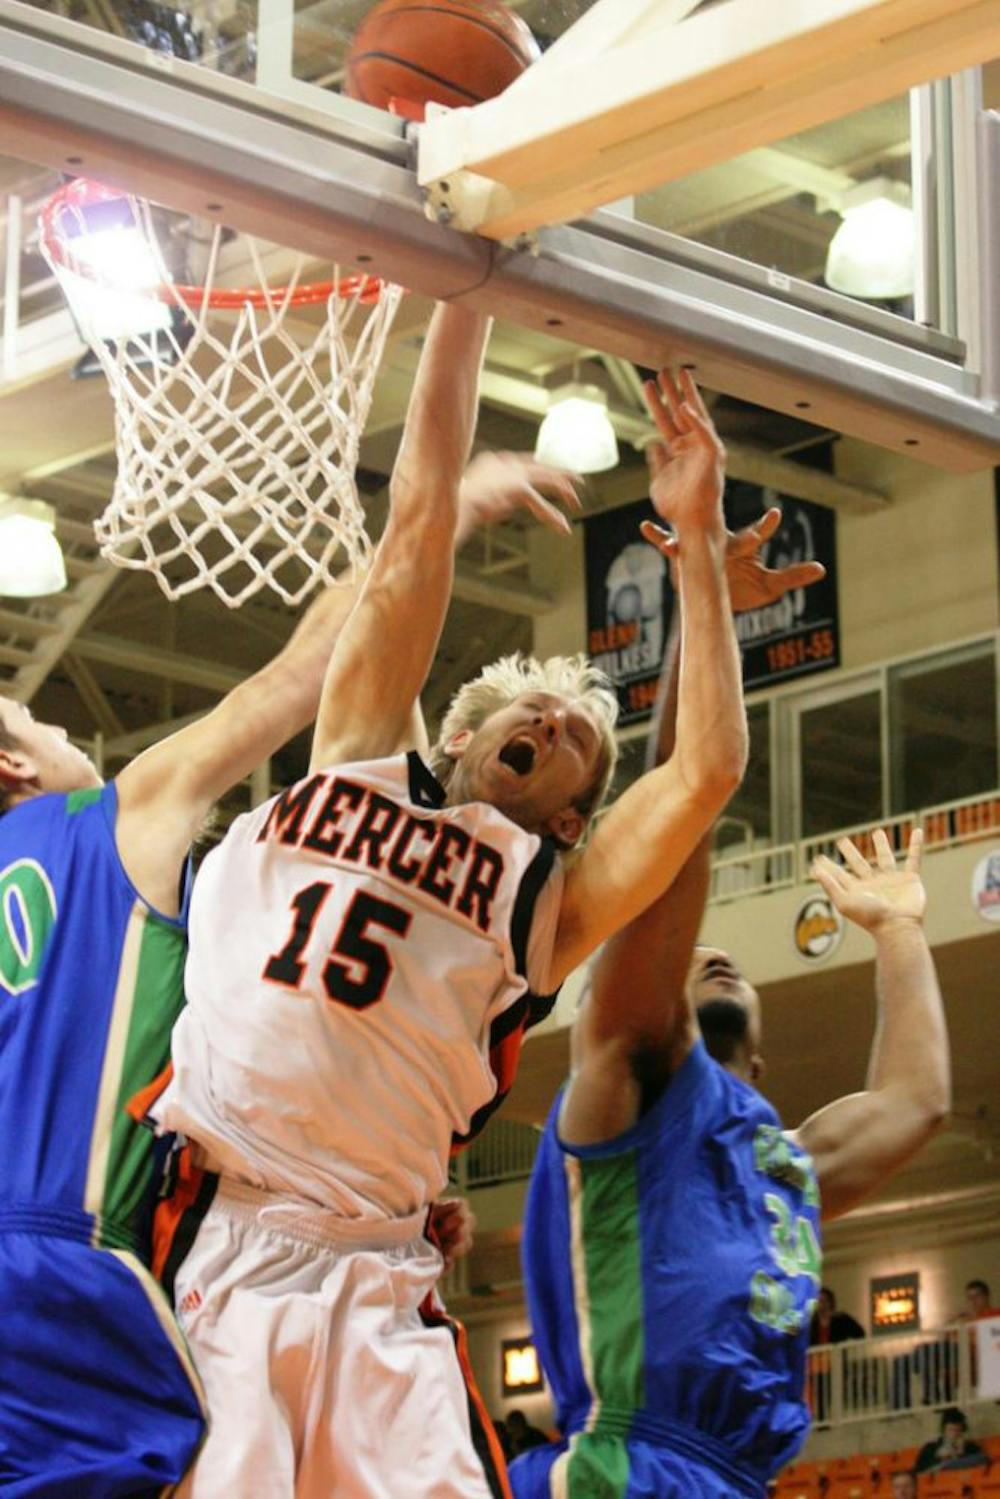 (Alex Lockwood / Cluster Staff) Mercer's Justin Cecil attempts to dunk between two Florida Gulf Coast defenders in a recent home win against the Eagles.